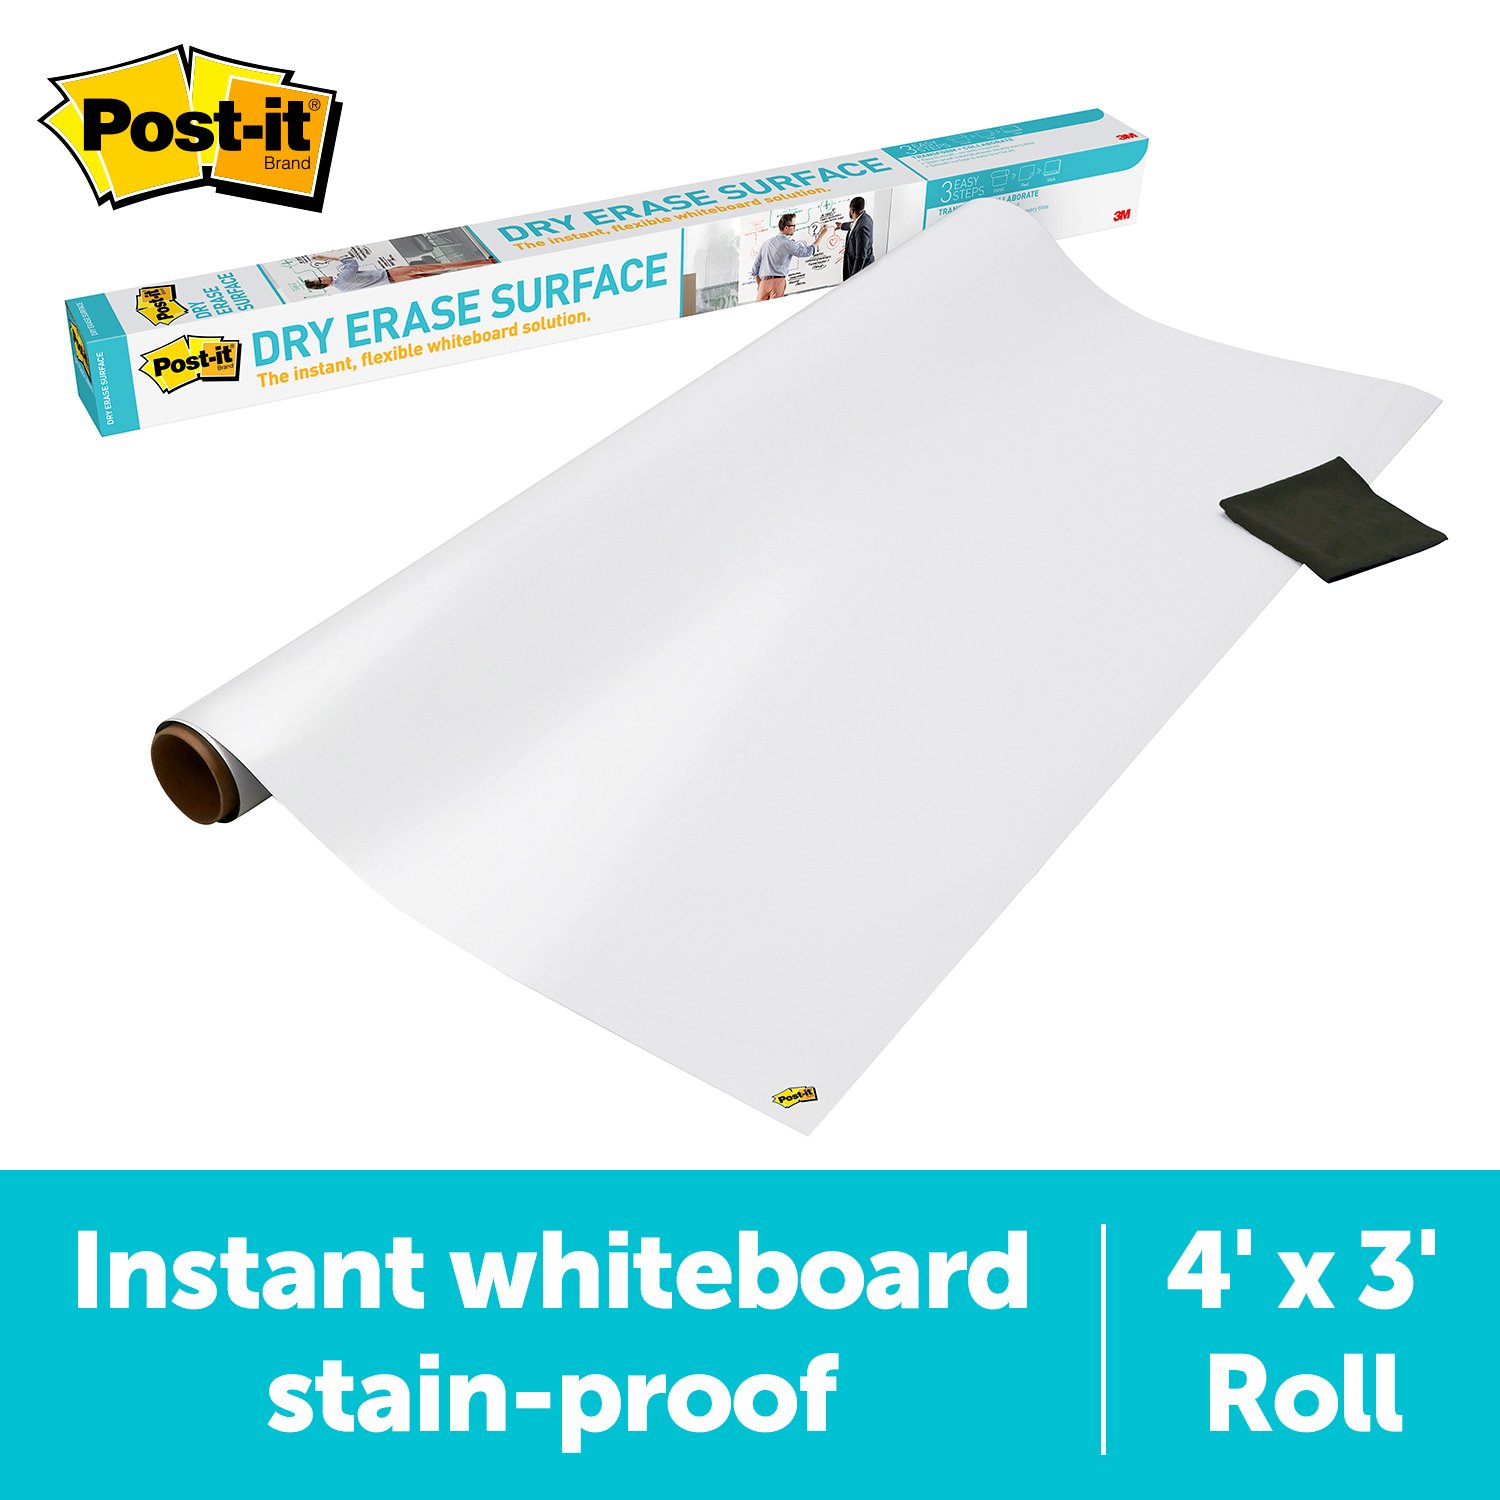 7100217828 - Post-it Super Sticky Dry Erase Surface DEF4x3, 3 ft x 4 ft (91.4 cm x 1.21 m)